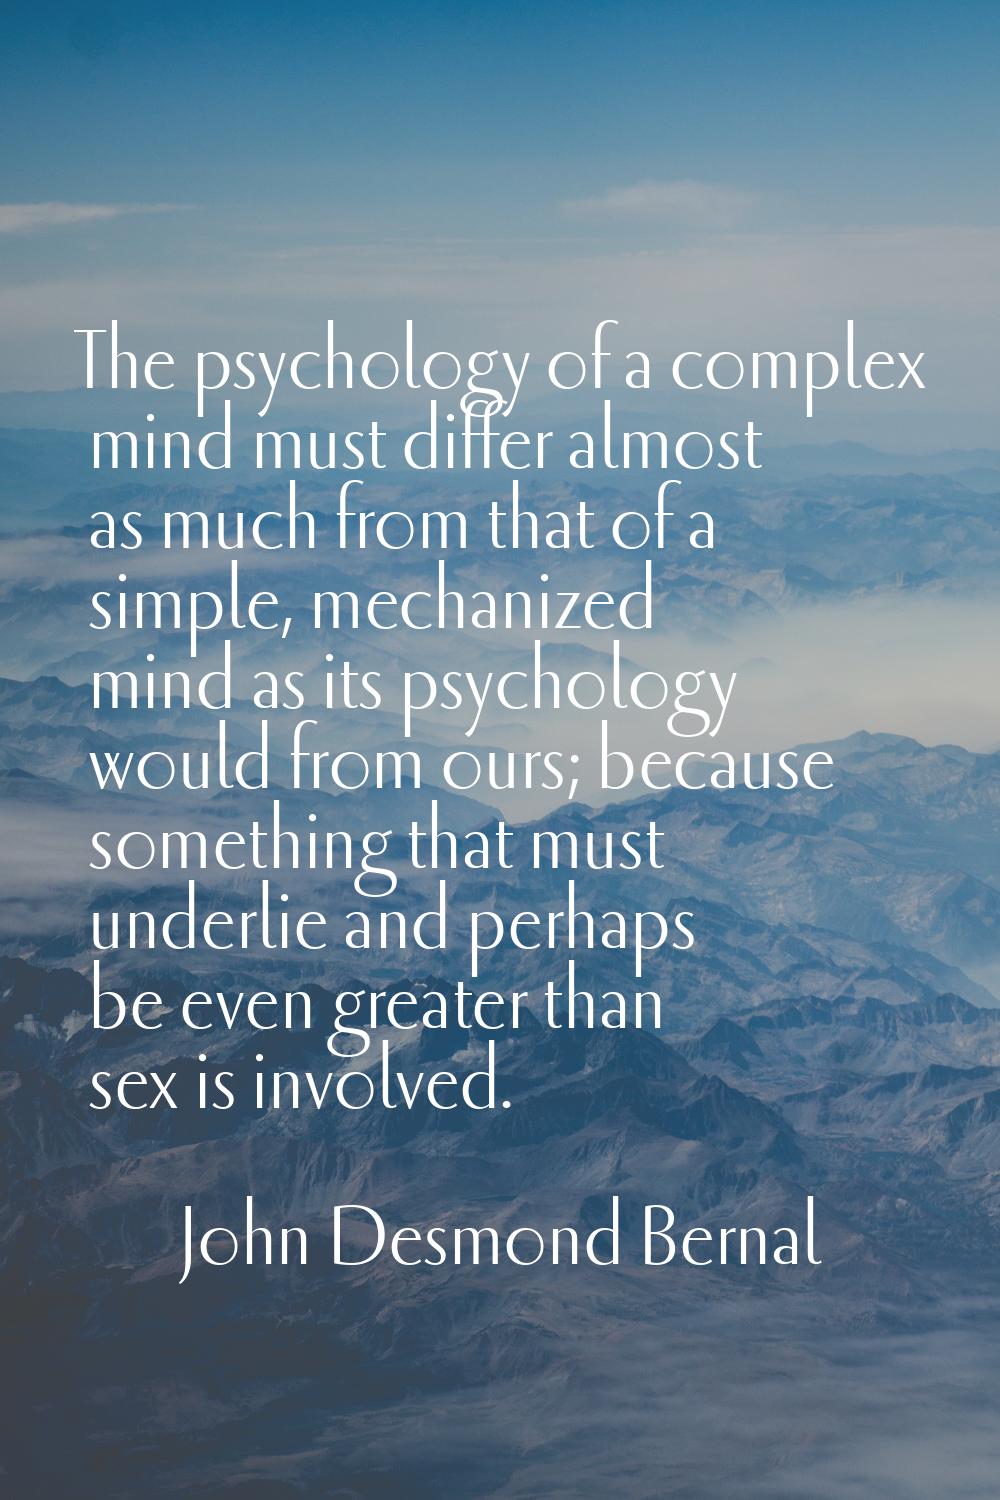 The psychology of a complex mind must differ almost as much from that of a simple, mechanized mind 